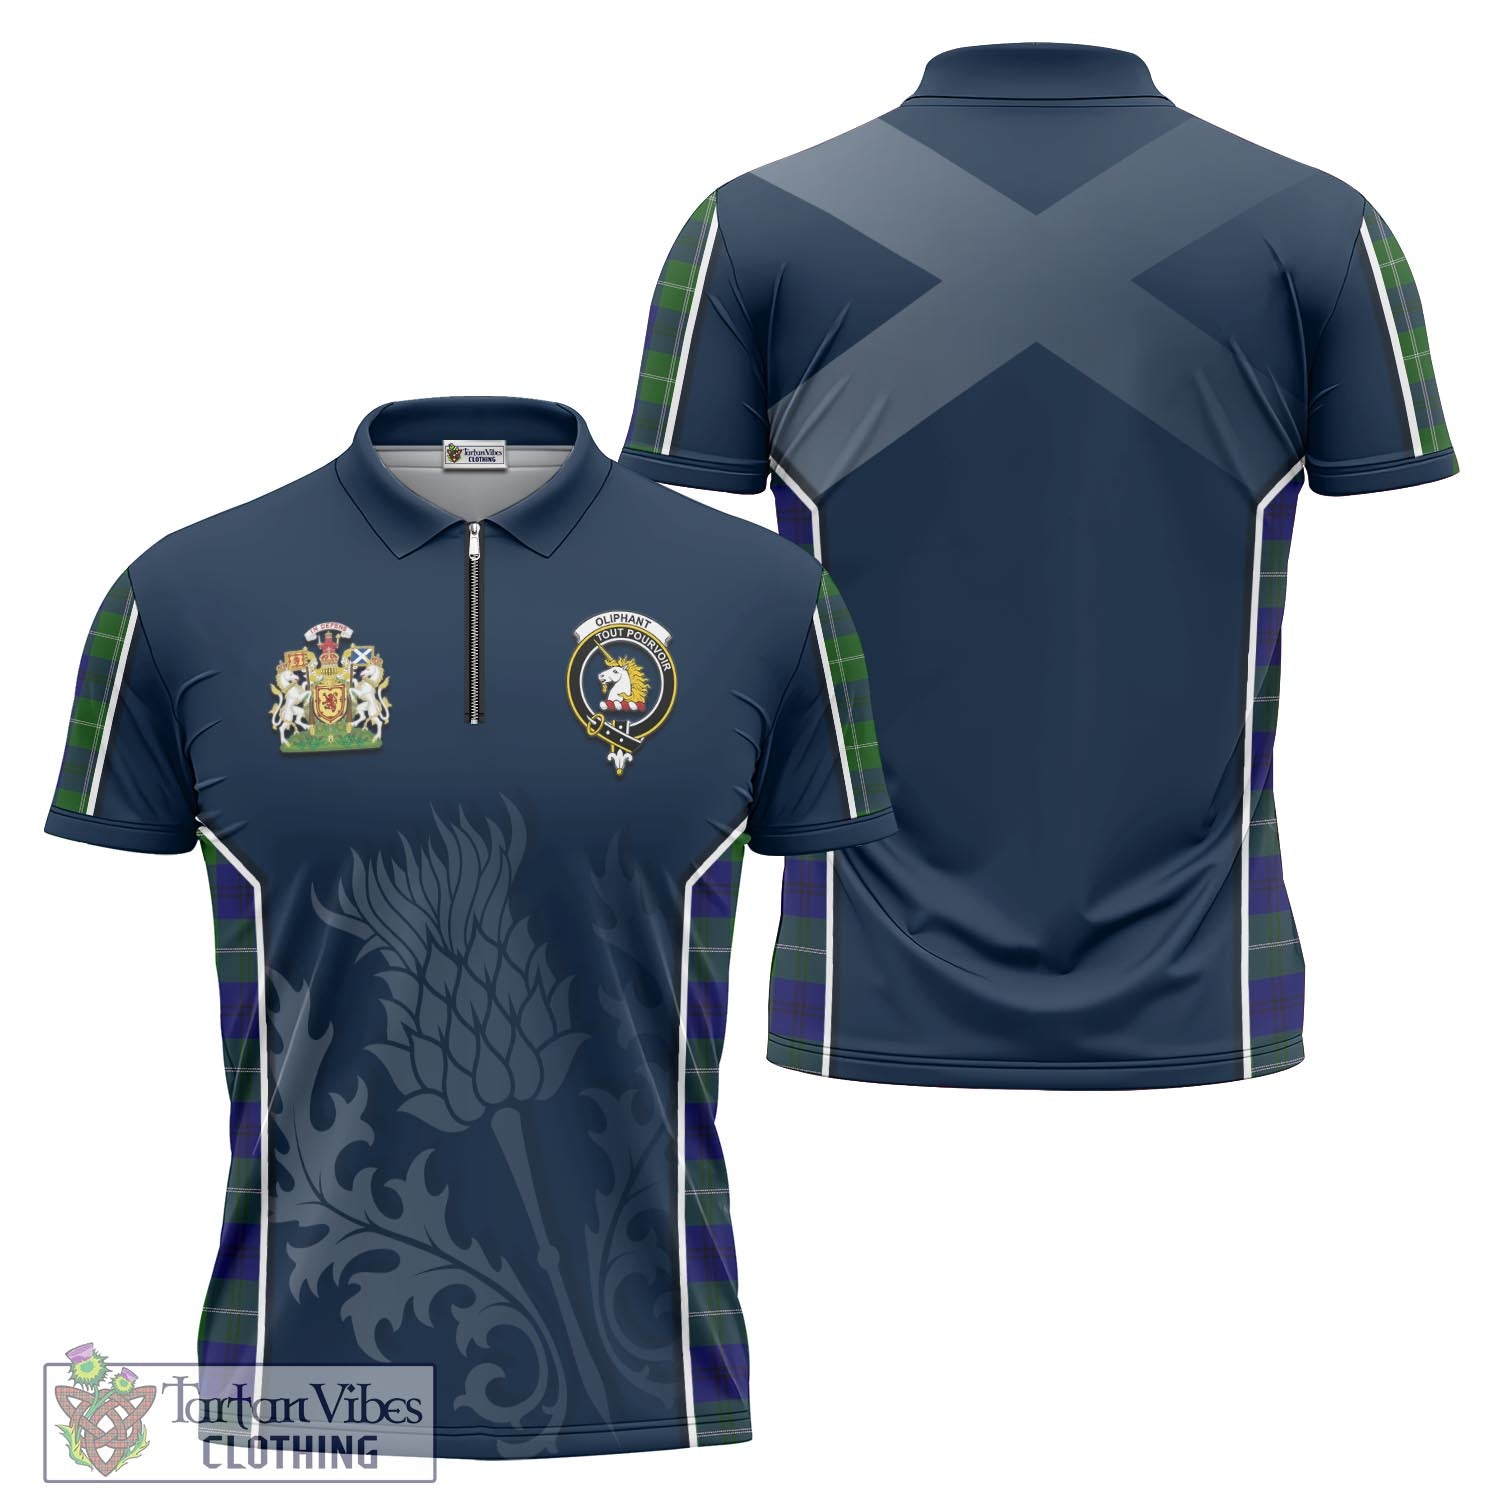 Tartan Vibes Clothing Oliphant Modern Tartan Zipper Polo Shirt with Family Crest and Scottish Thistle Vibes Sport Style